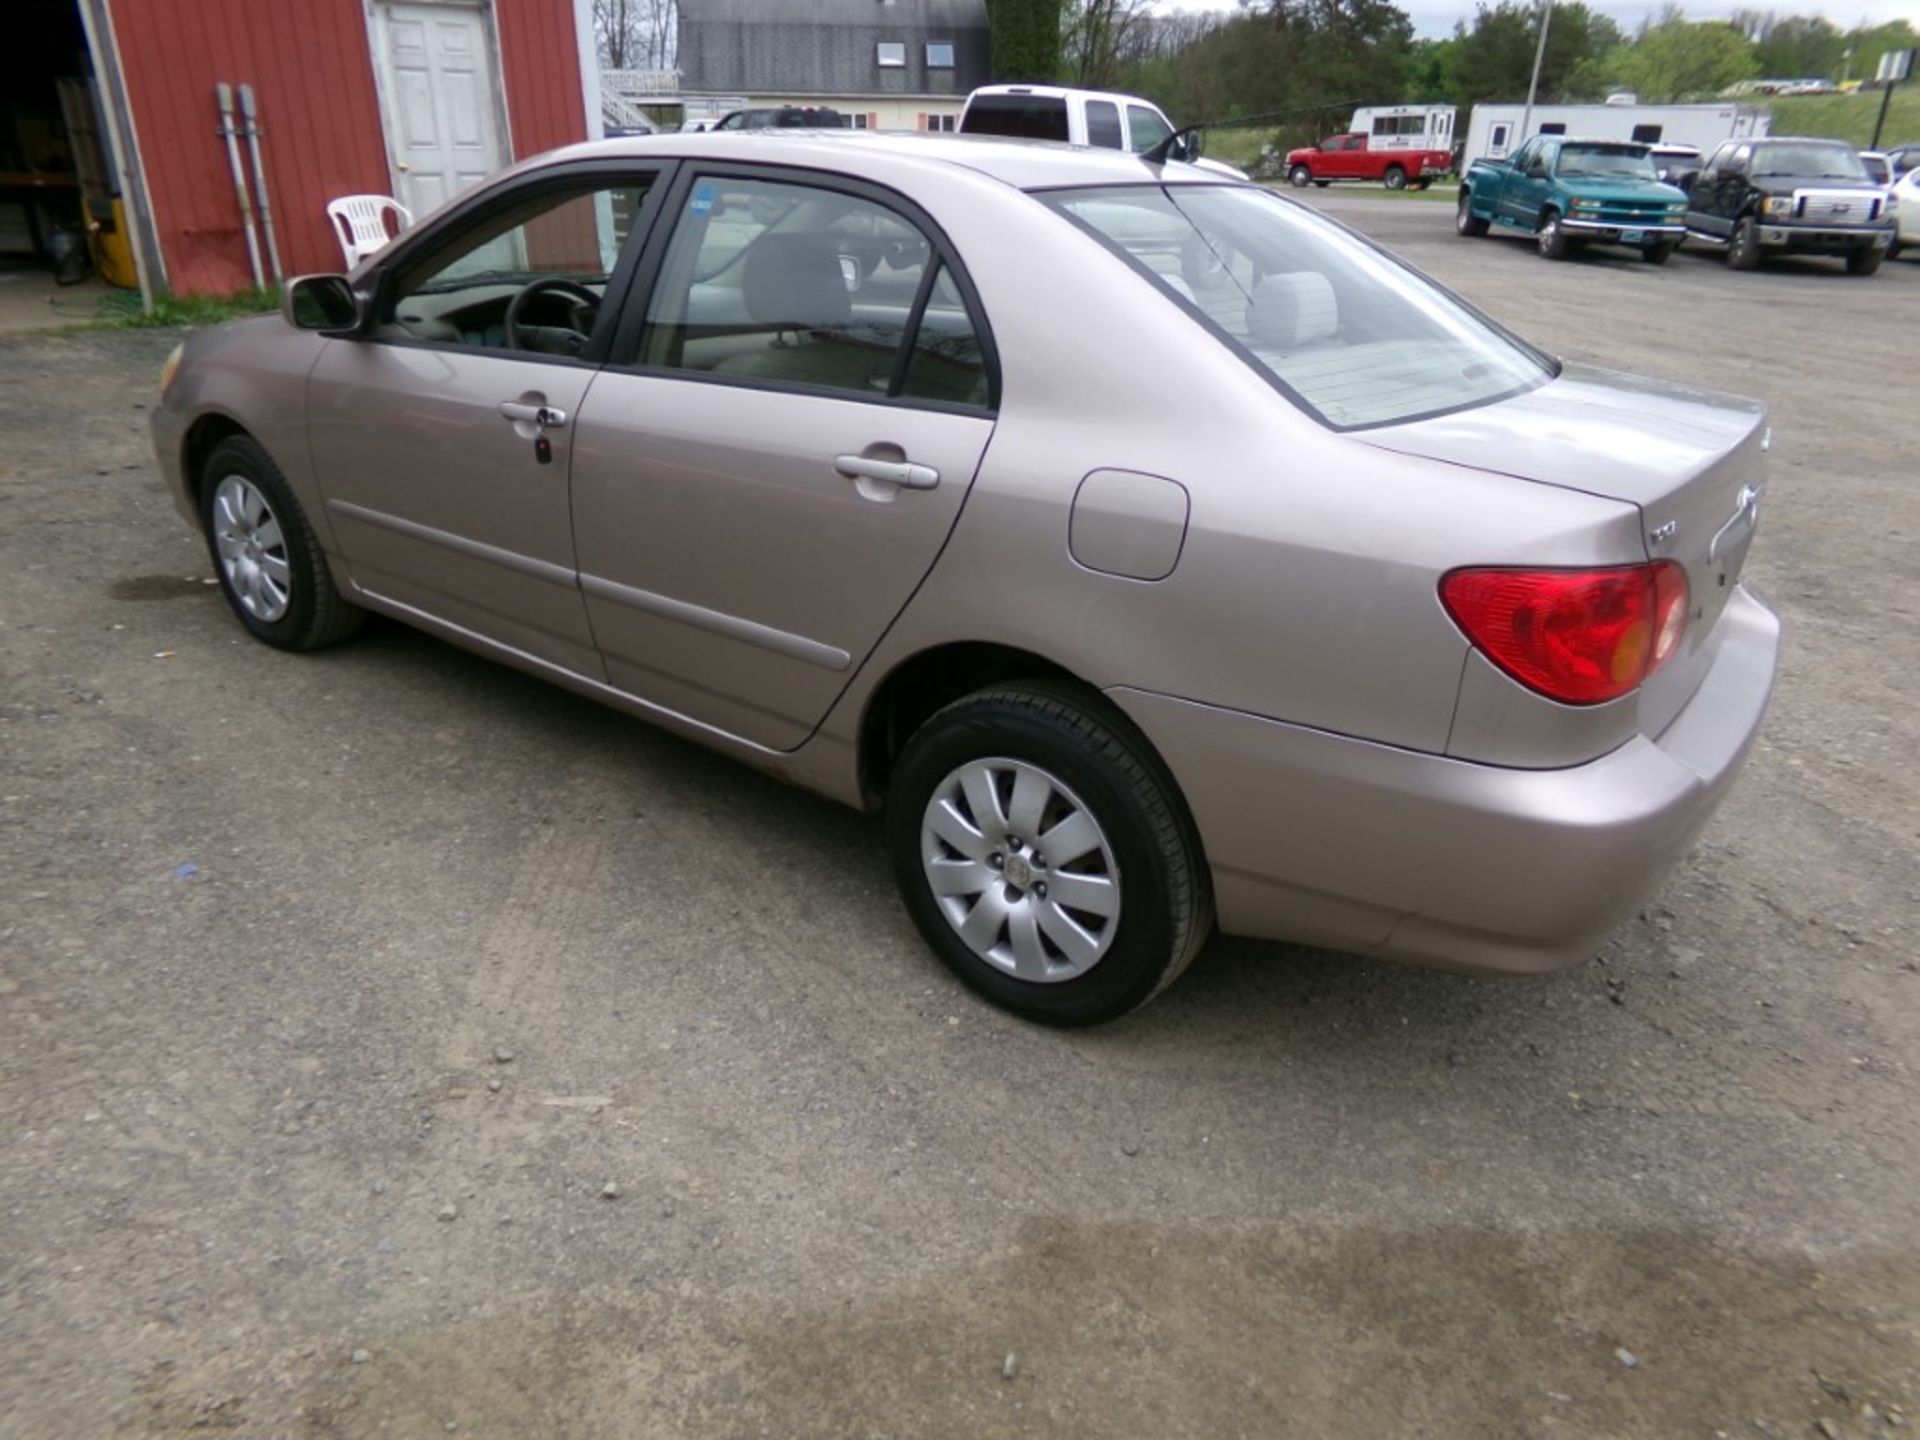 2003 Toyota Corolla, Tan, Auto Trans, TMU Miles - ODOMETER DOES NOT DISPLAY, VIN#: 2T1BR38E93C148691 - Image 2 of 6